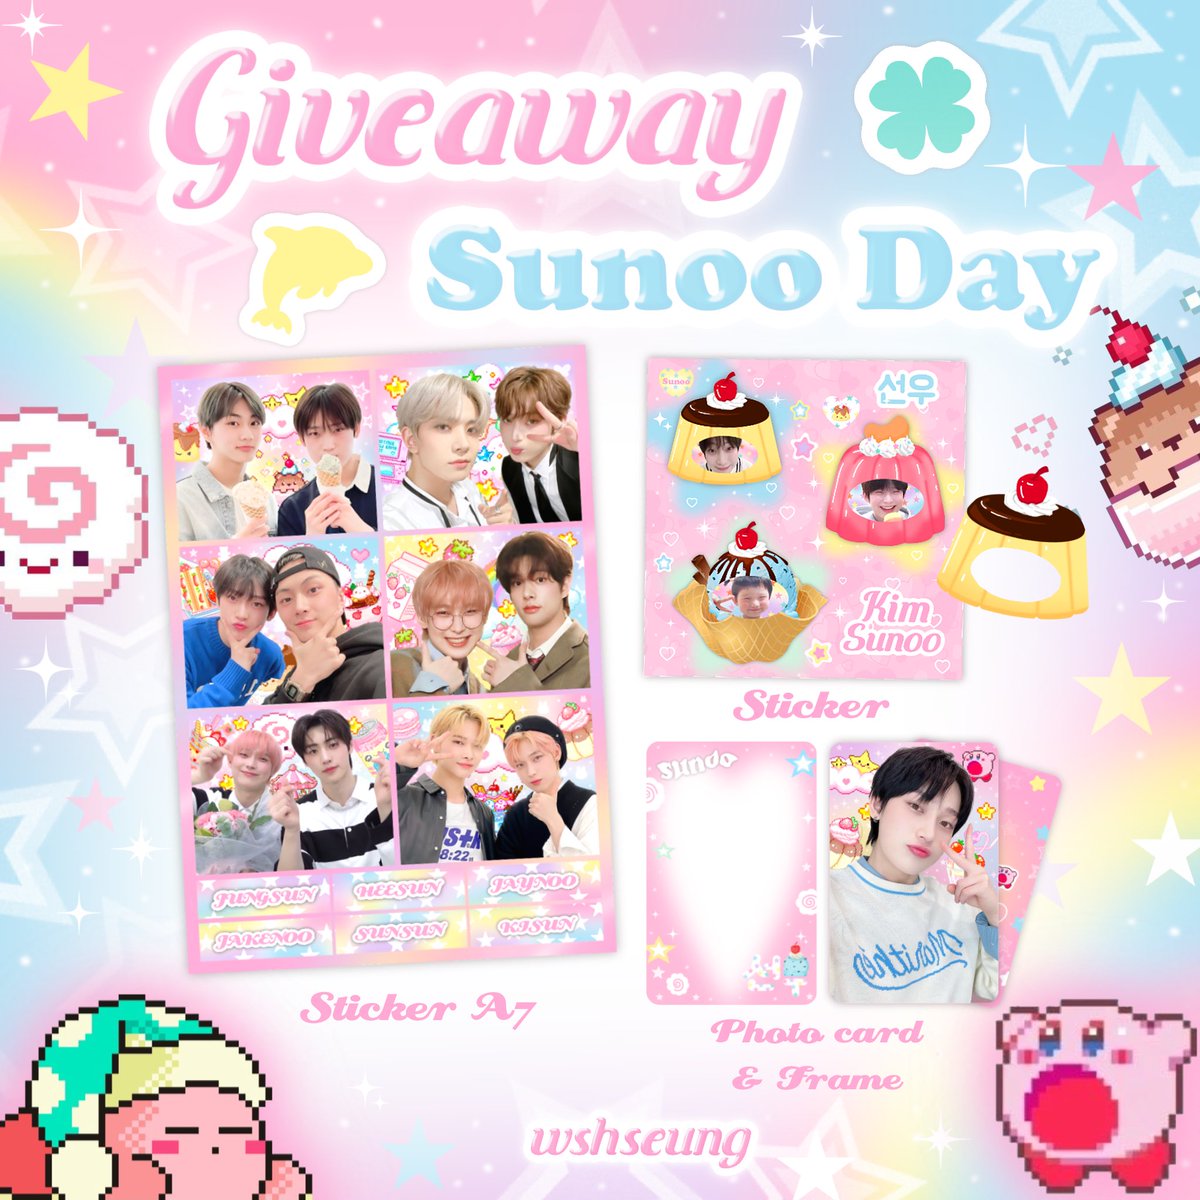 ꕀ kindly rt
🐬 — 𝓖𝗶𝘃𝗲𝗮𝘄𝗮𝘆 𝗦𝘂𝗻𝗼𝗼 𝗱𝗮𝘆 ♡ !!

★ only 10 sets ★
: sticker A7
: sticker 
: photo card & frame card 

🍒shipping 40 ฿

(🍄) 𝗴𝗴 𝗳𝗼𝗿𝗺𝘀 — 26.06 [ 20:30 น.]
          𝗿𝗮𝗻𝗱𝗼𝗺 𝗿𝘁 𝟭𝘀𝗲𝘁 

𓐖 #HAPPYSUNOODAY 𓐖